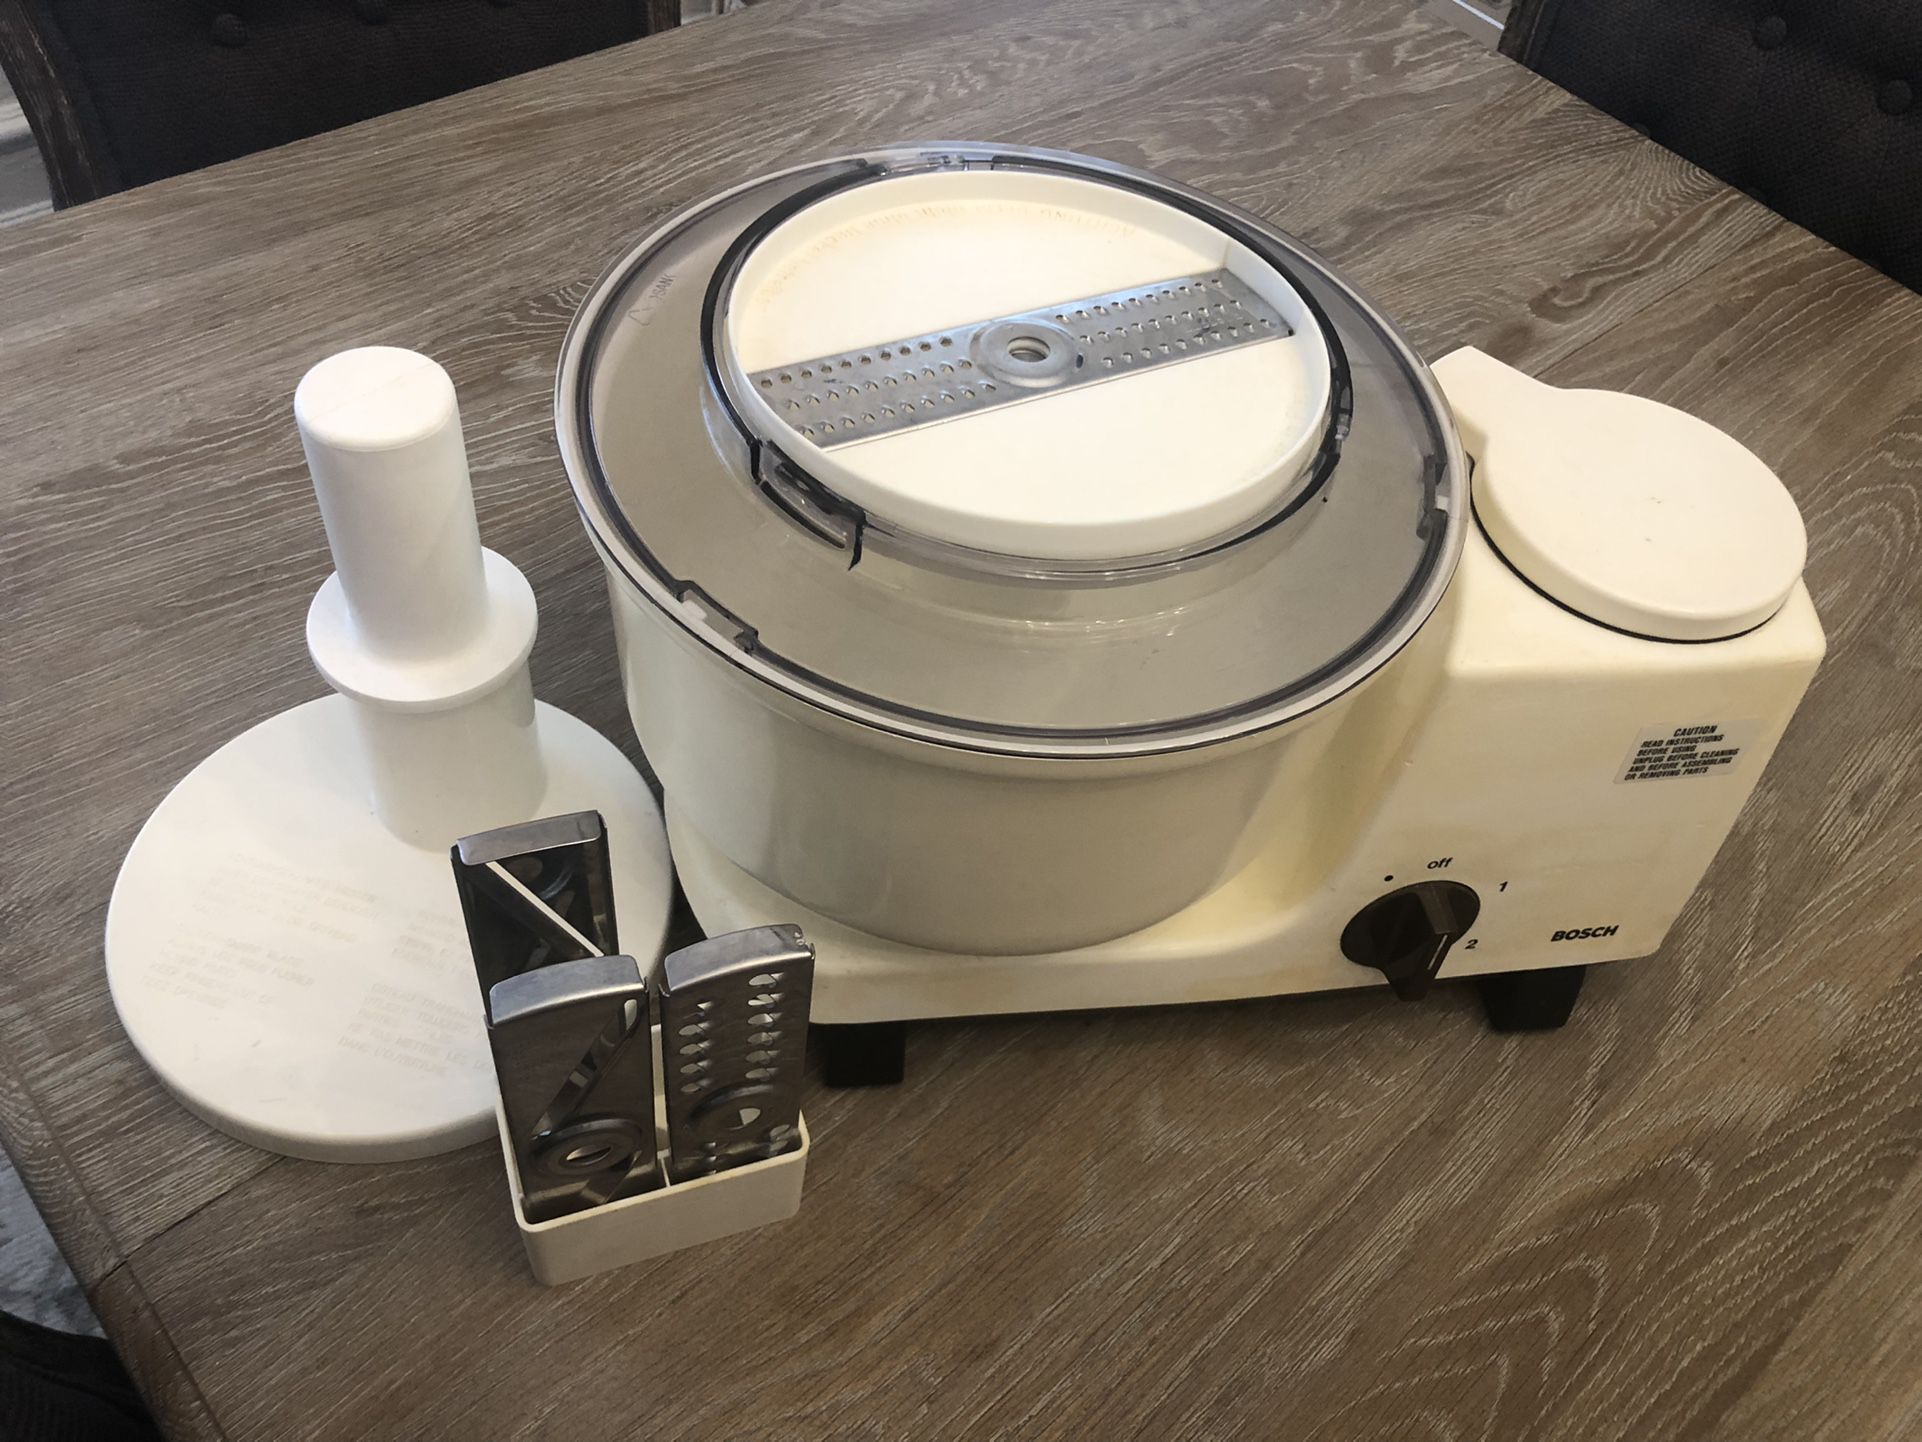 Bosch Universal Plus Mixer With Multiple Accessories for Sale in Heathrow,  FL - OfferUp